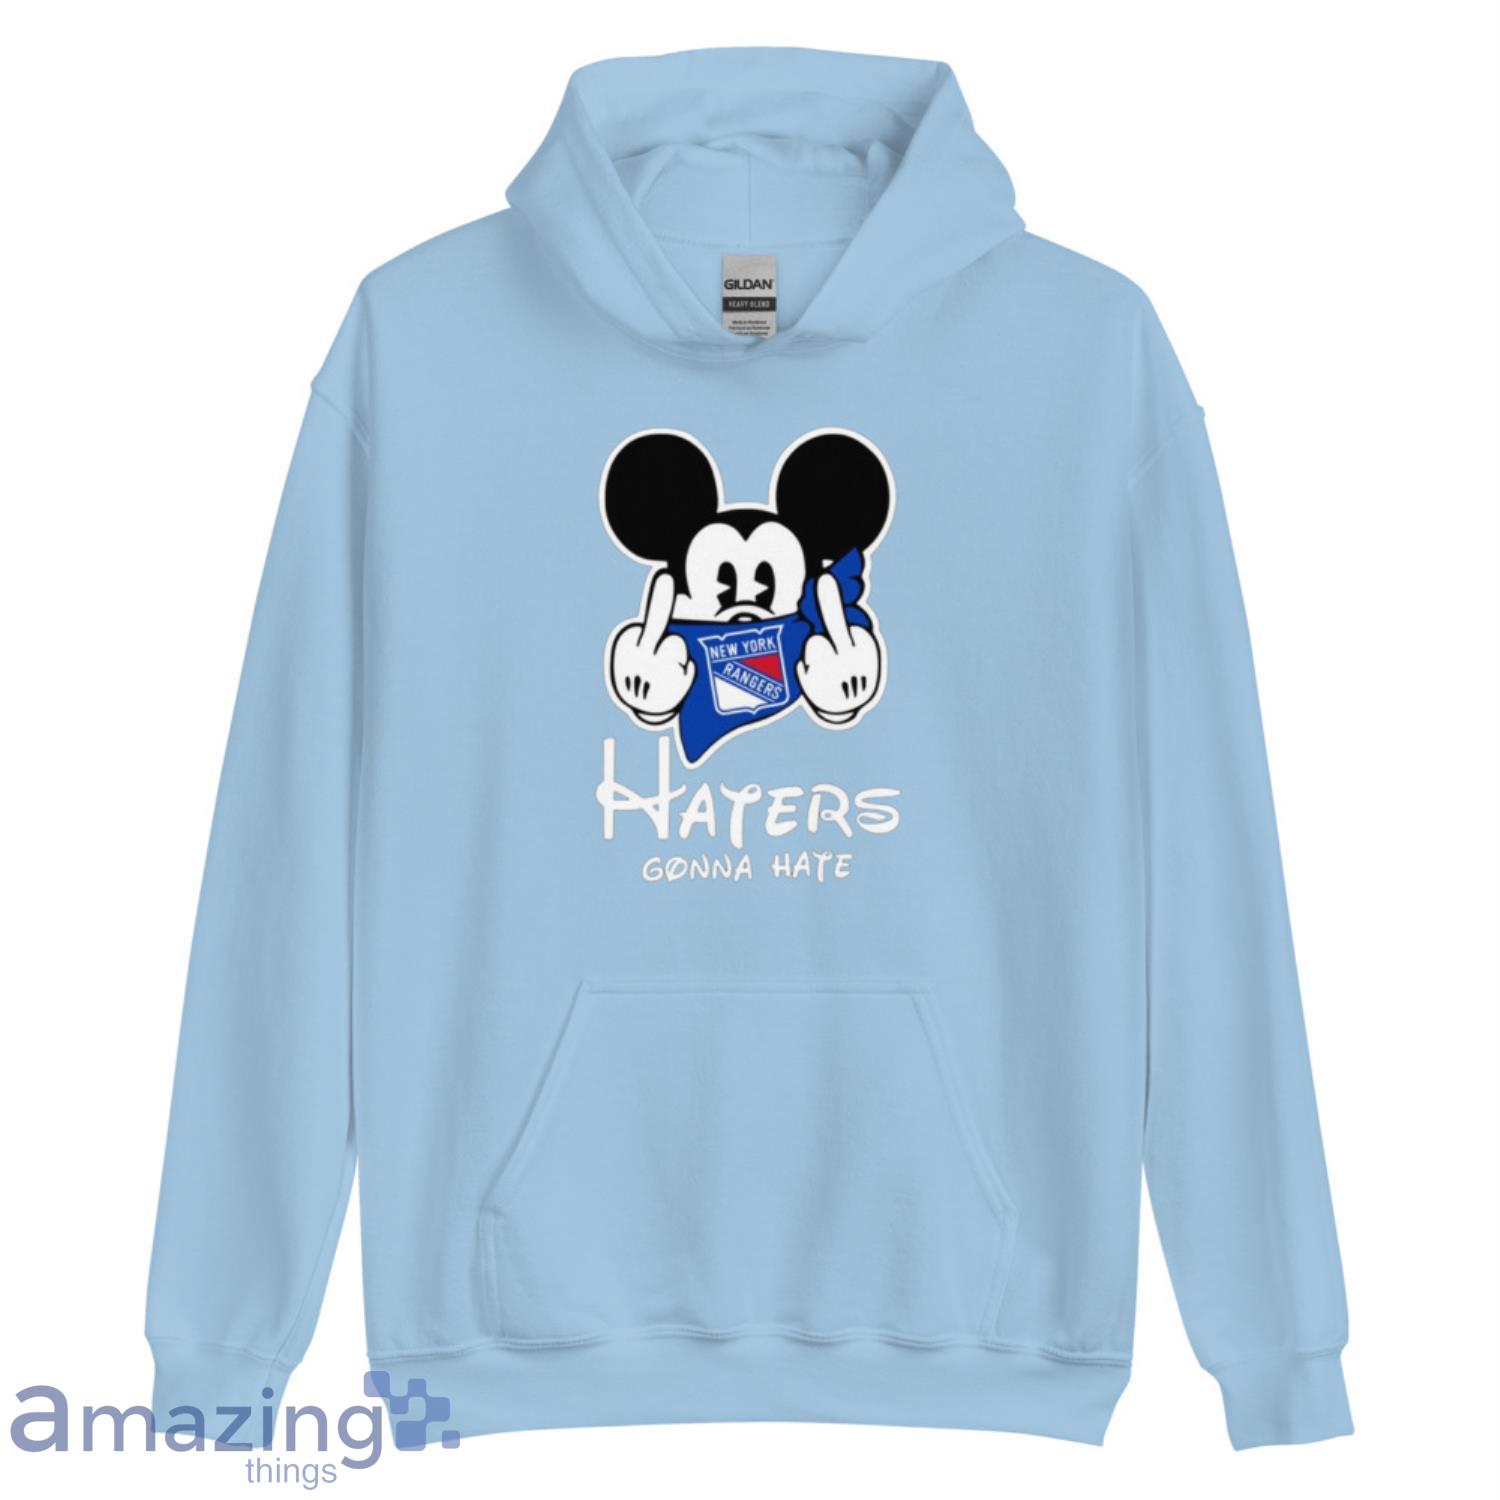 New York Rangers NHL Mickey Mouse T-shirt, Hoodie - Tagotee